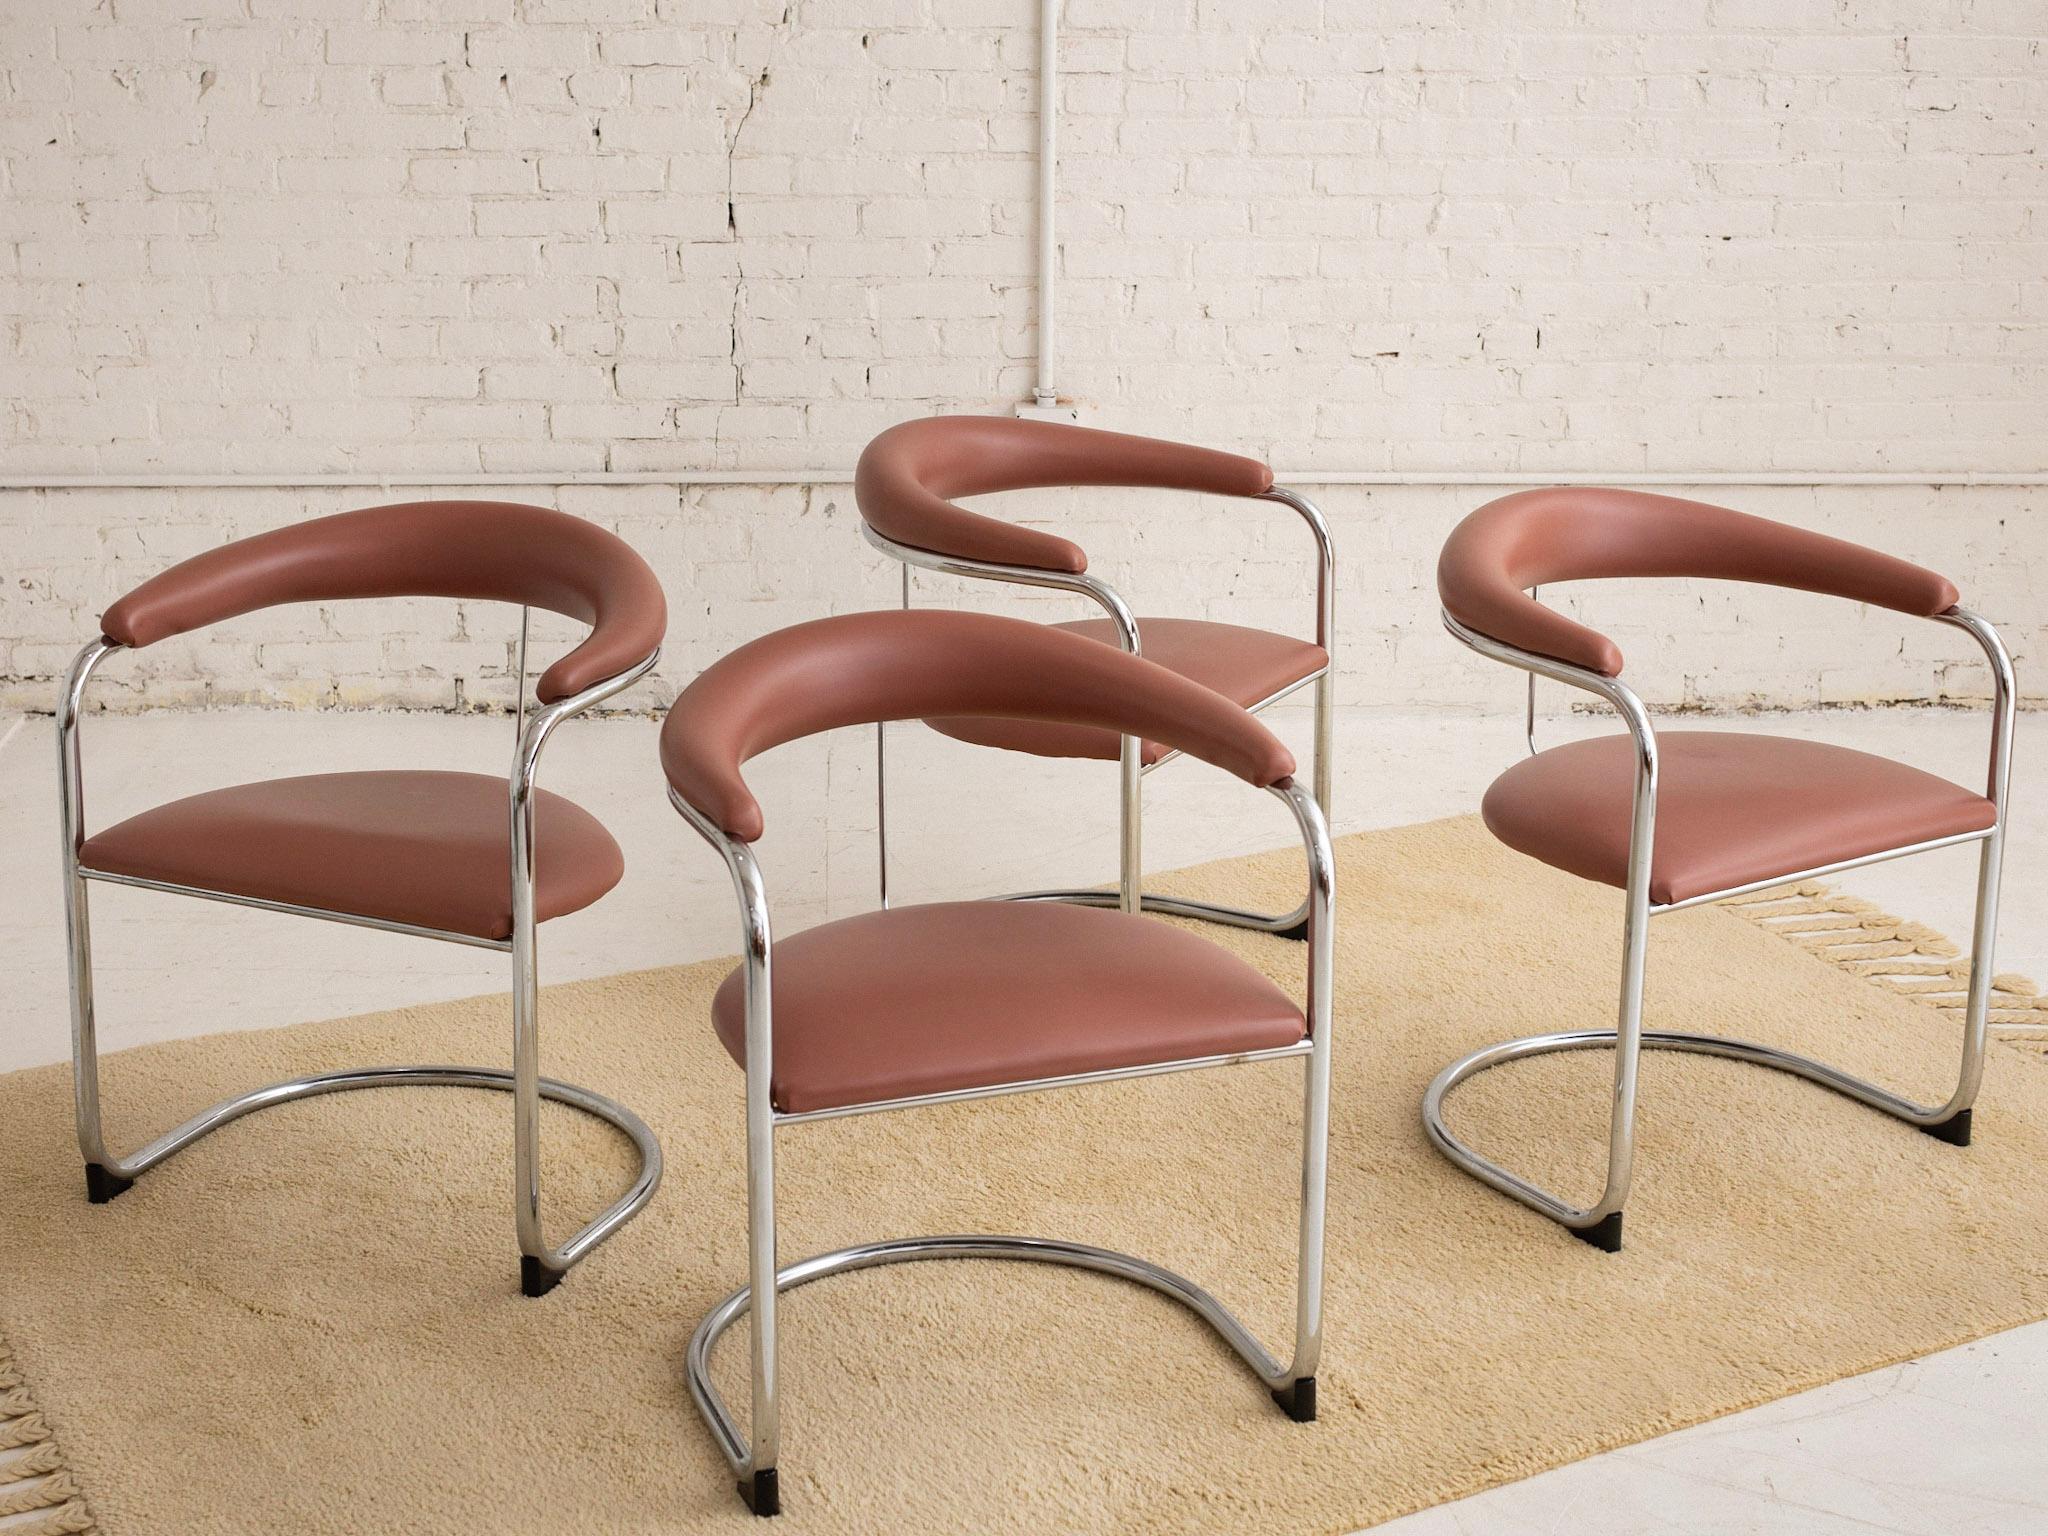 A set of 4 armchairs designed by Anton Lorenz and produced by Thonet. Tubular steal frames with pink vinyl seats and back rests. Retains original manufacturer tags.